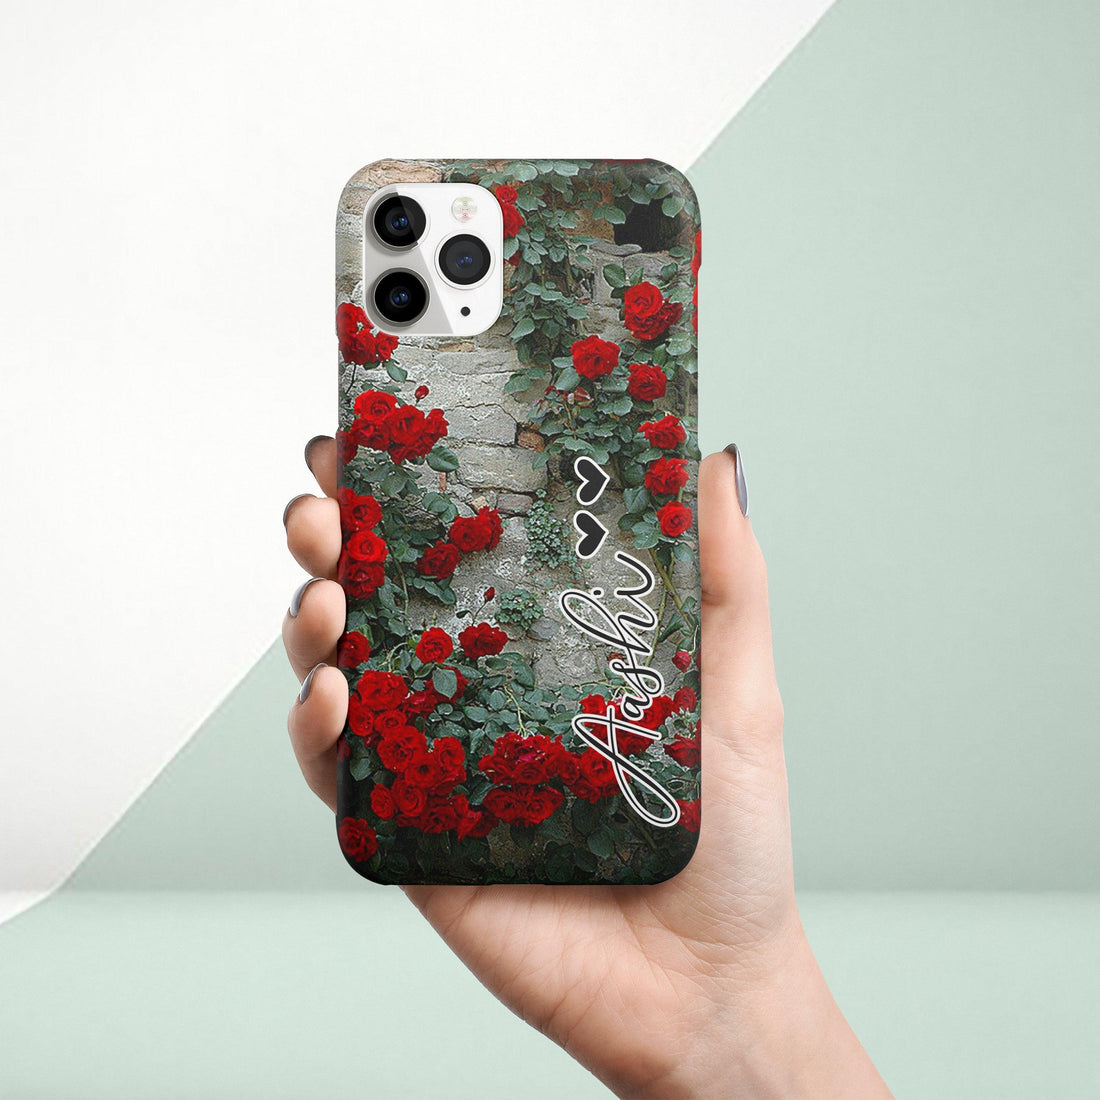 Floral Rose Shades Phone Case Cover For Redmi/Xiaomi